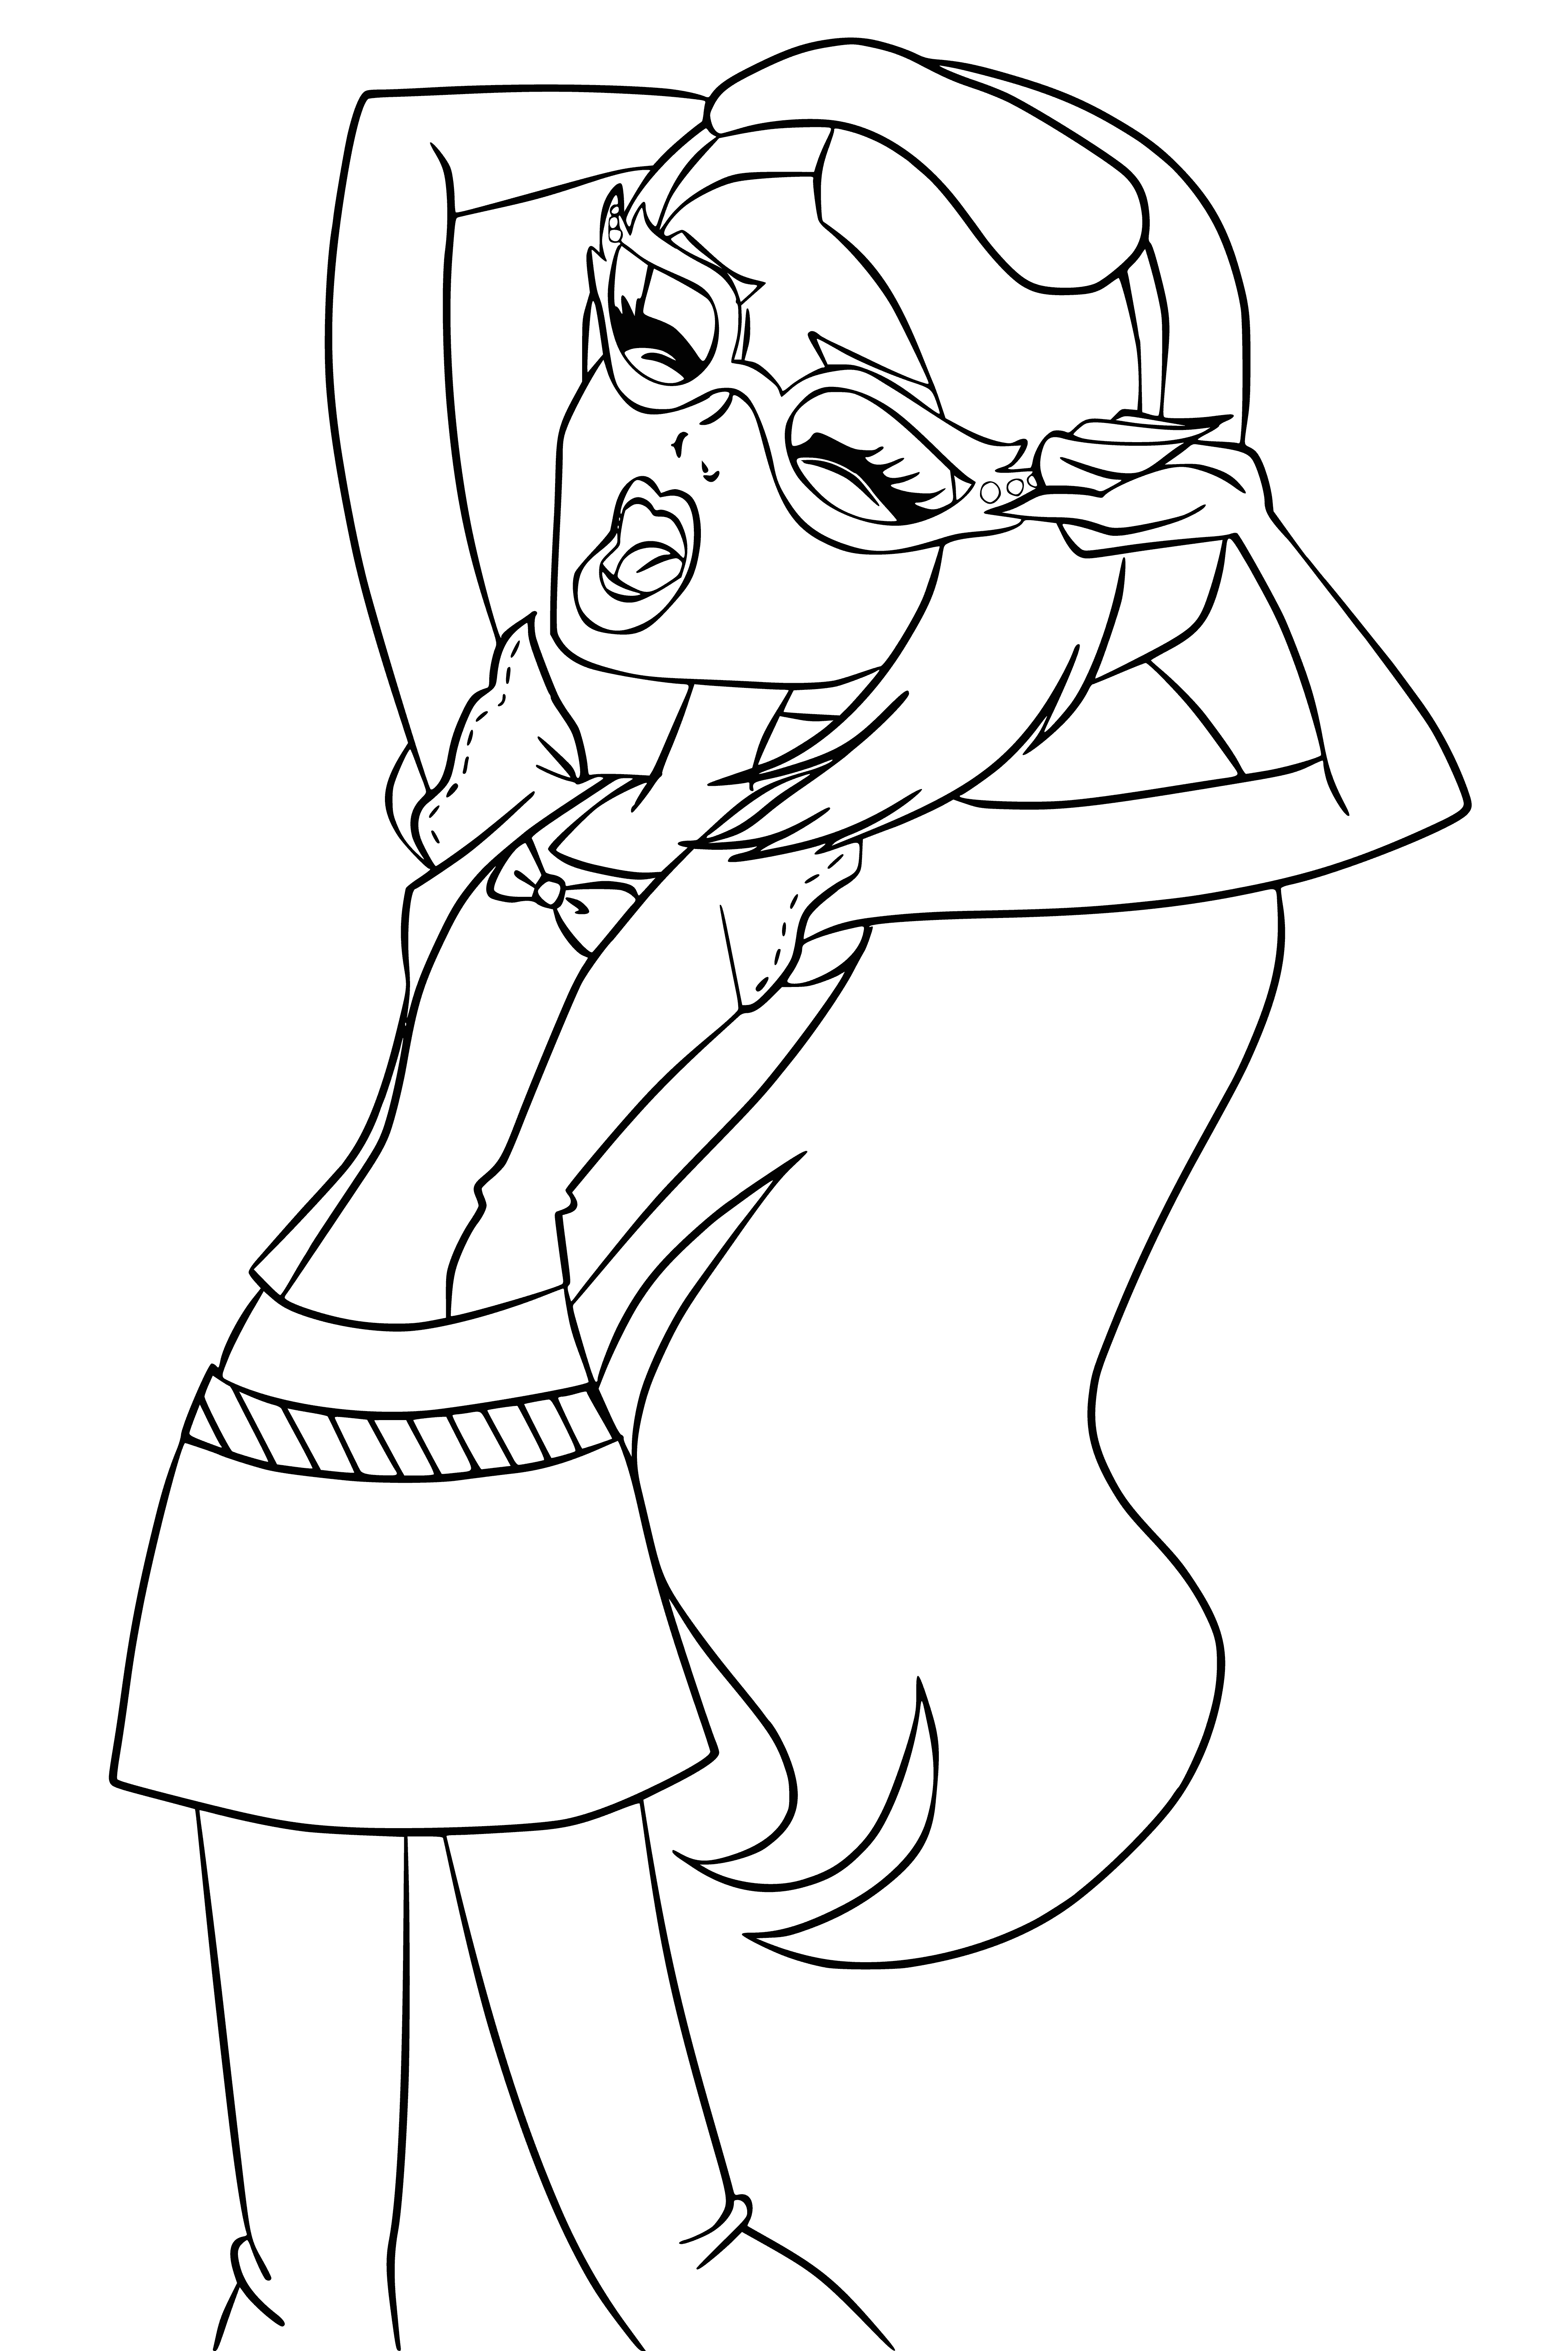 coloring page: Ghoulia Yelps is a cool ghoul in a black & white ensemble with bright blue eyes & red glasses.